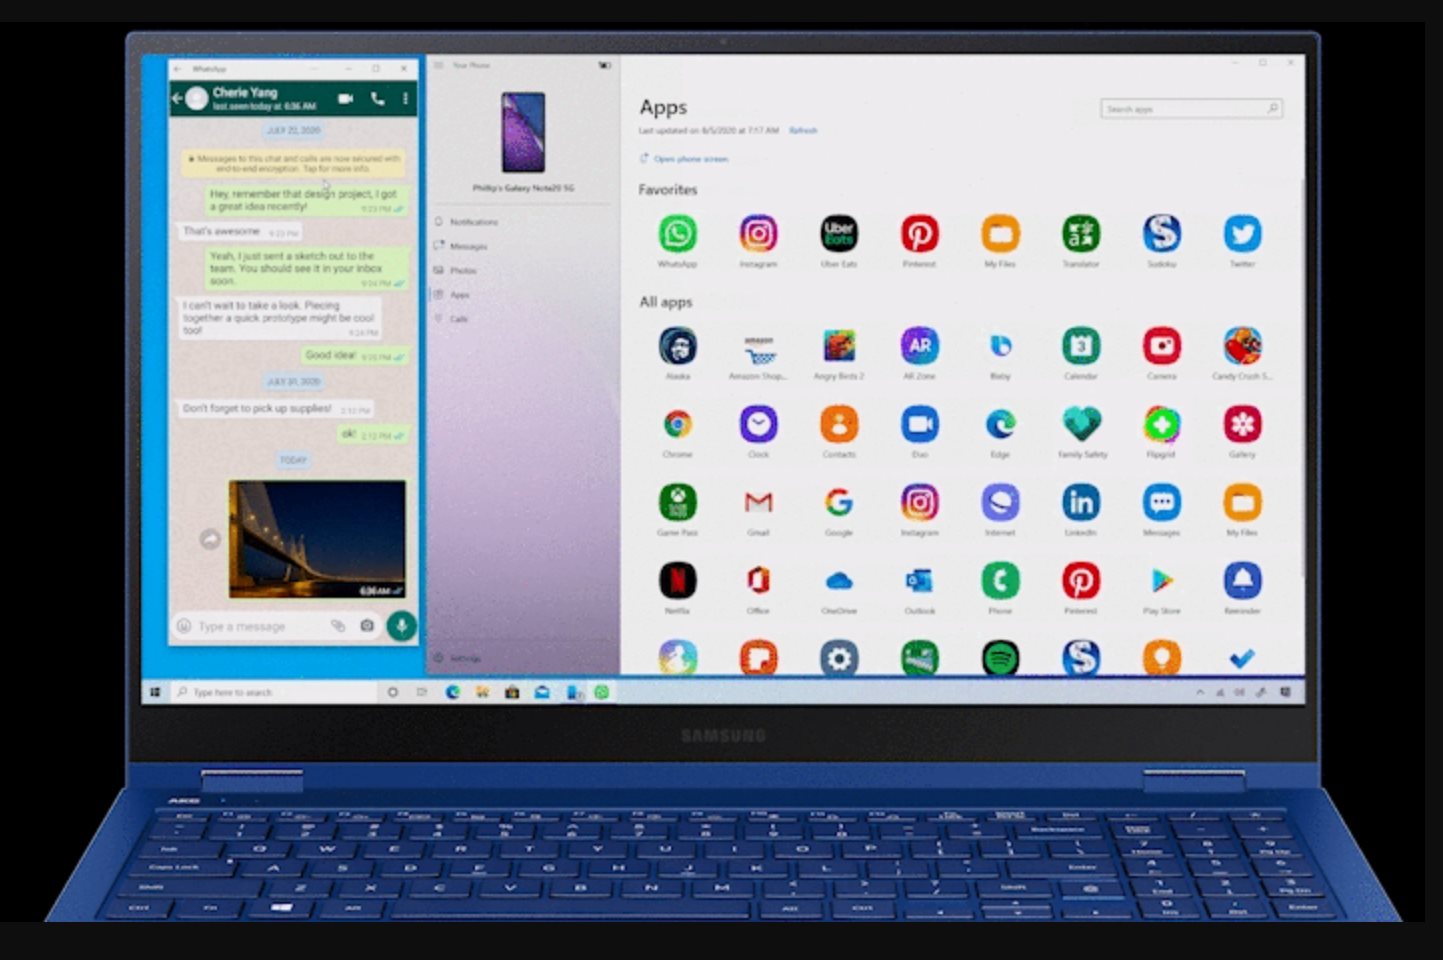 The Dream of Running Android Apps on Windows 10 Is Finally Coming True